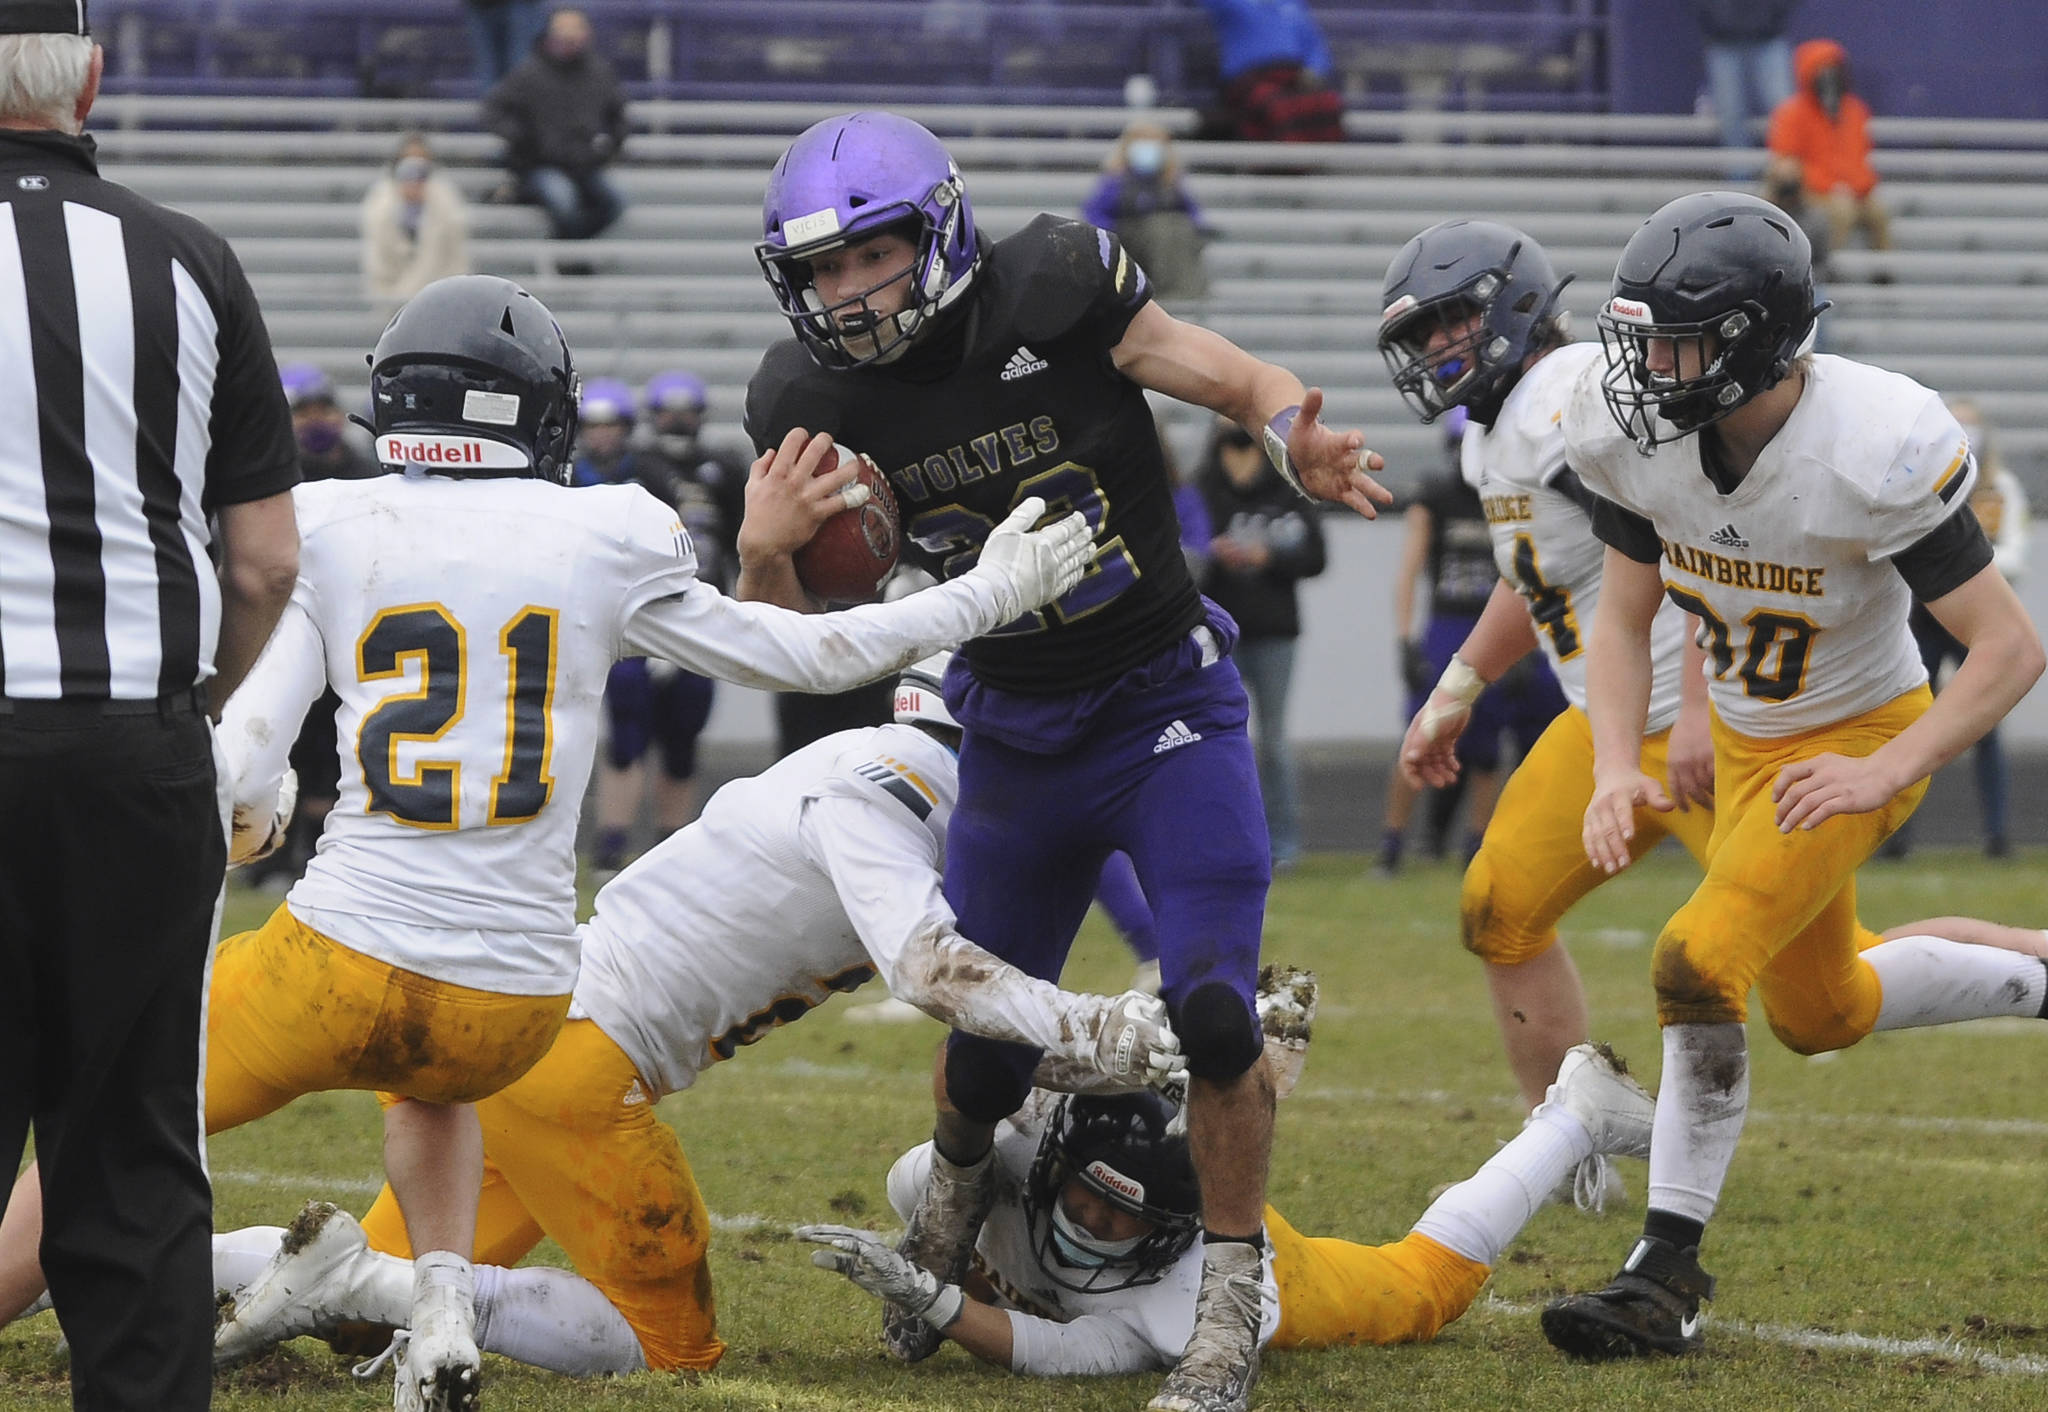 Sequim’s Walker Ward rumbled 31 times for 197 yards and two scores and added an interception defensively in the Wolves’ 38-0 win over Bainbridge on Saturday.
Michael Dashiell/Olympic Peninsula News Group